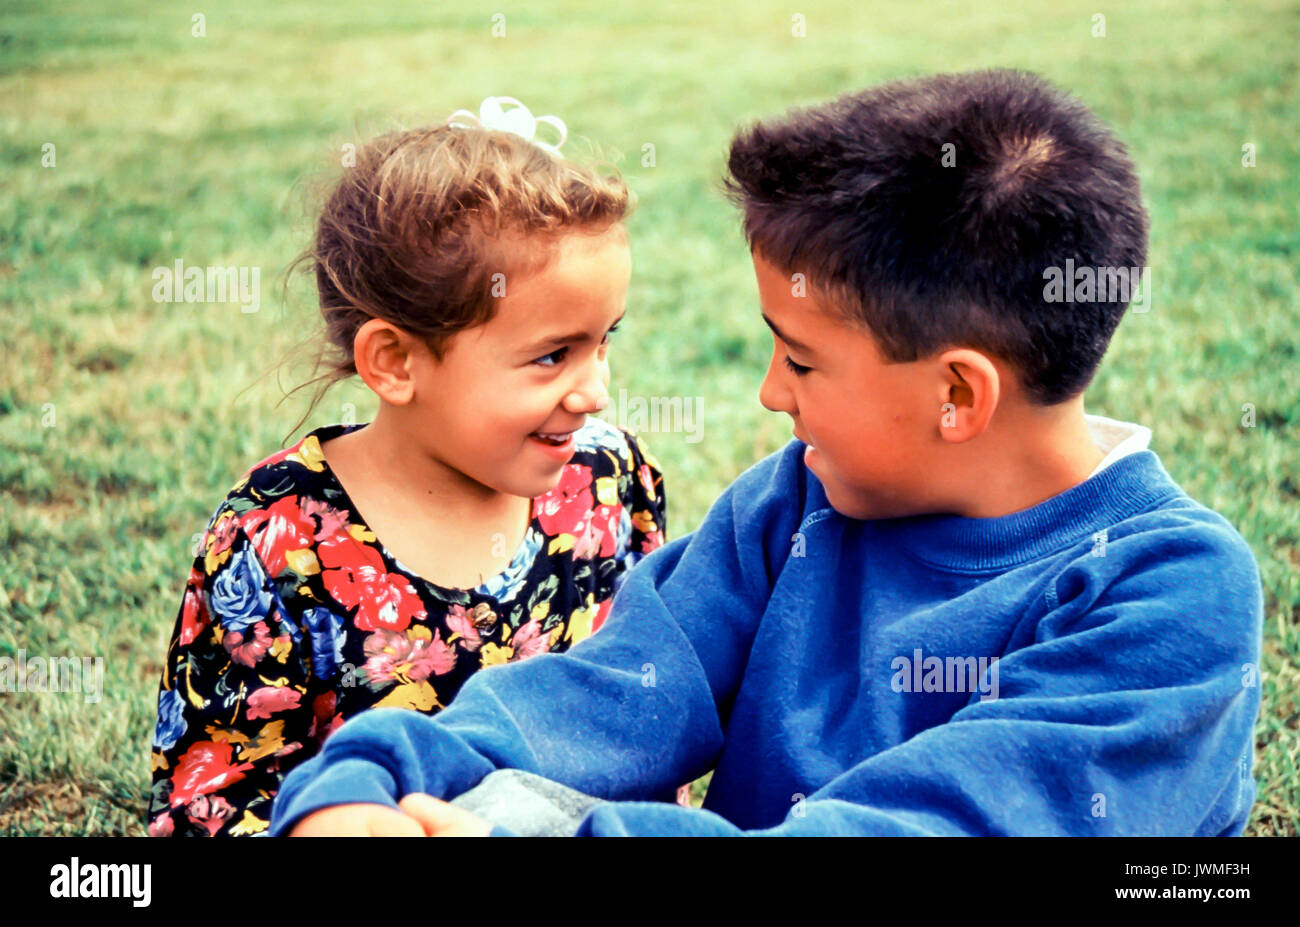 Asian brother 8-9 years old playing together talking with younger sister 5-6 years old Stock Photo